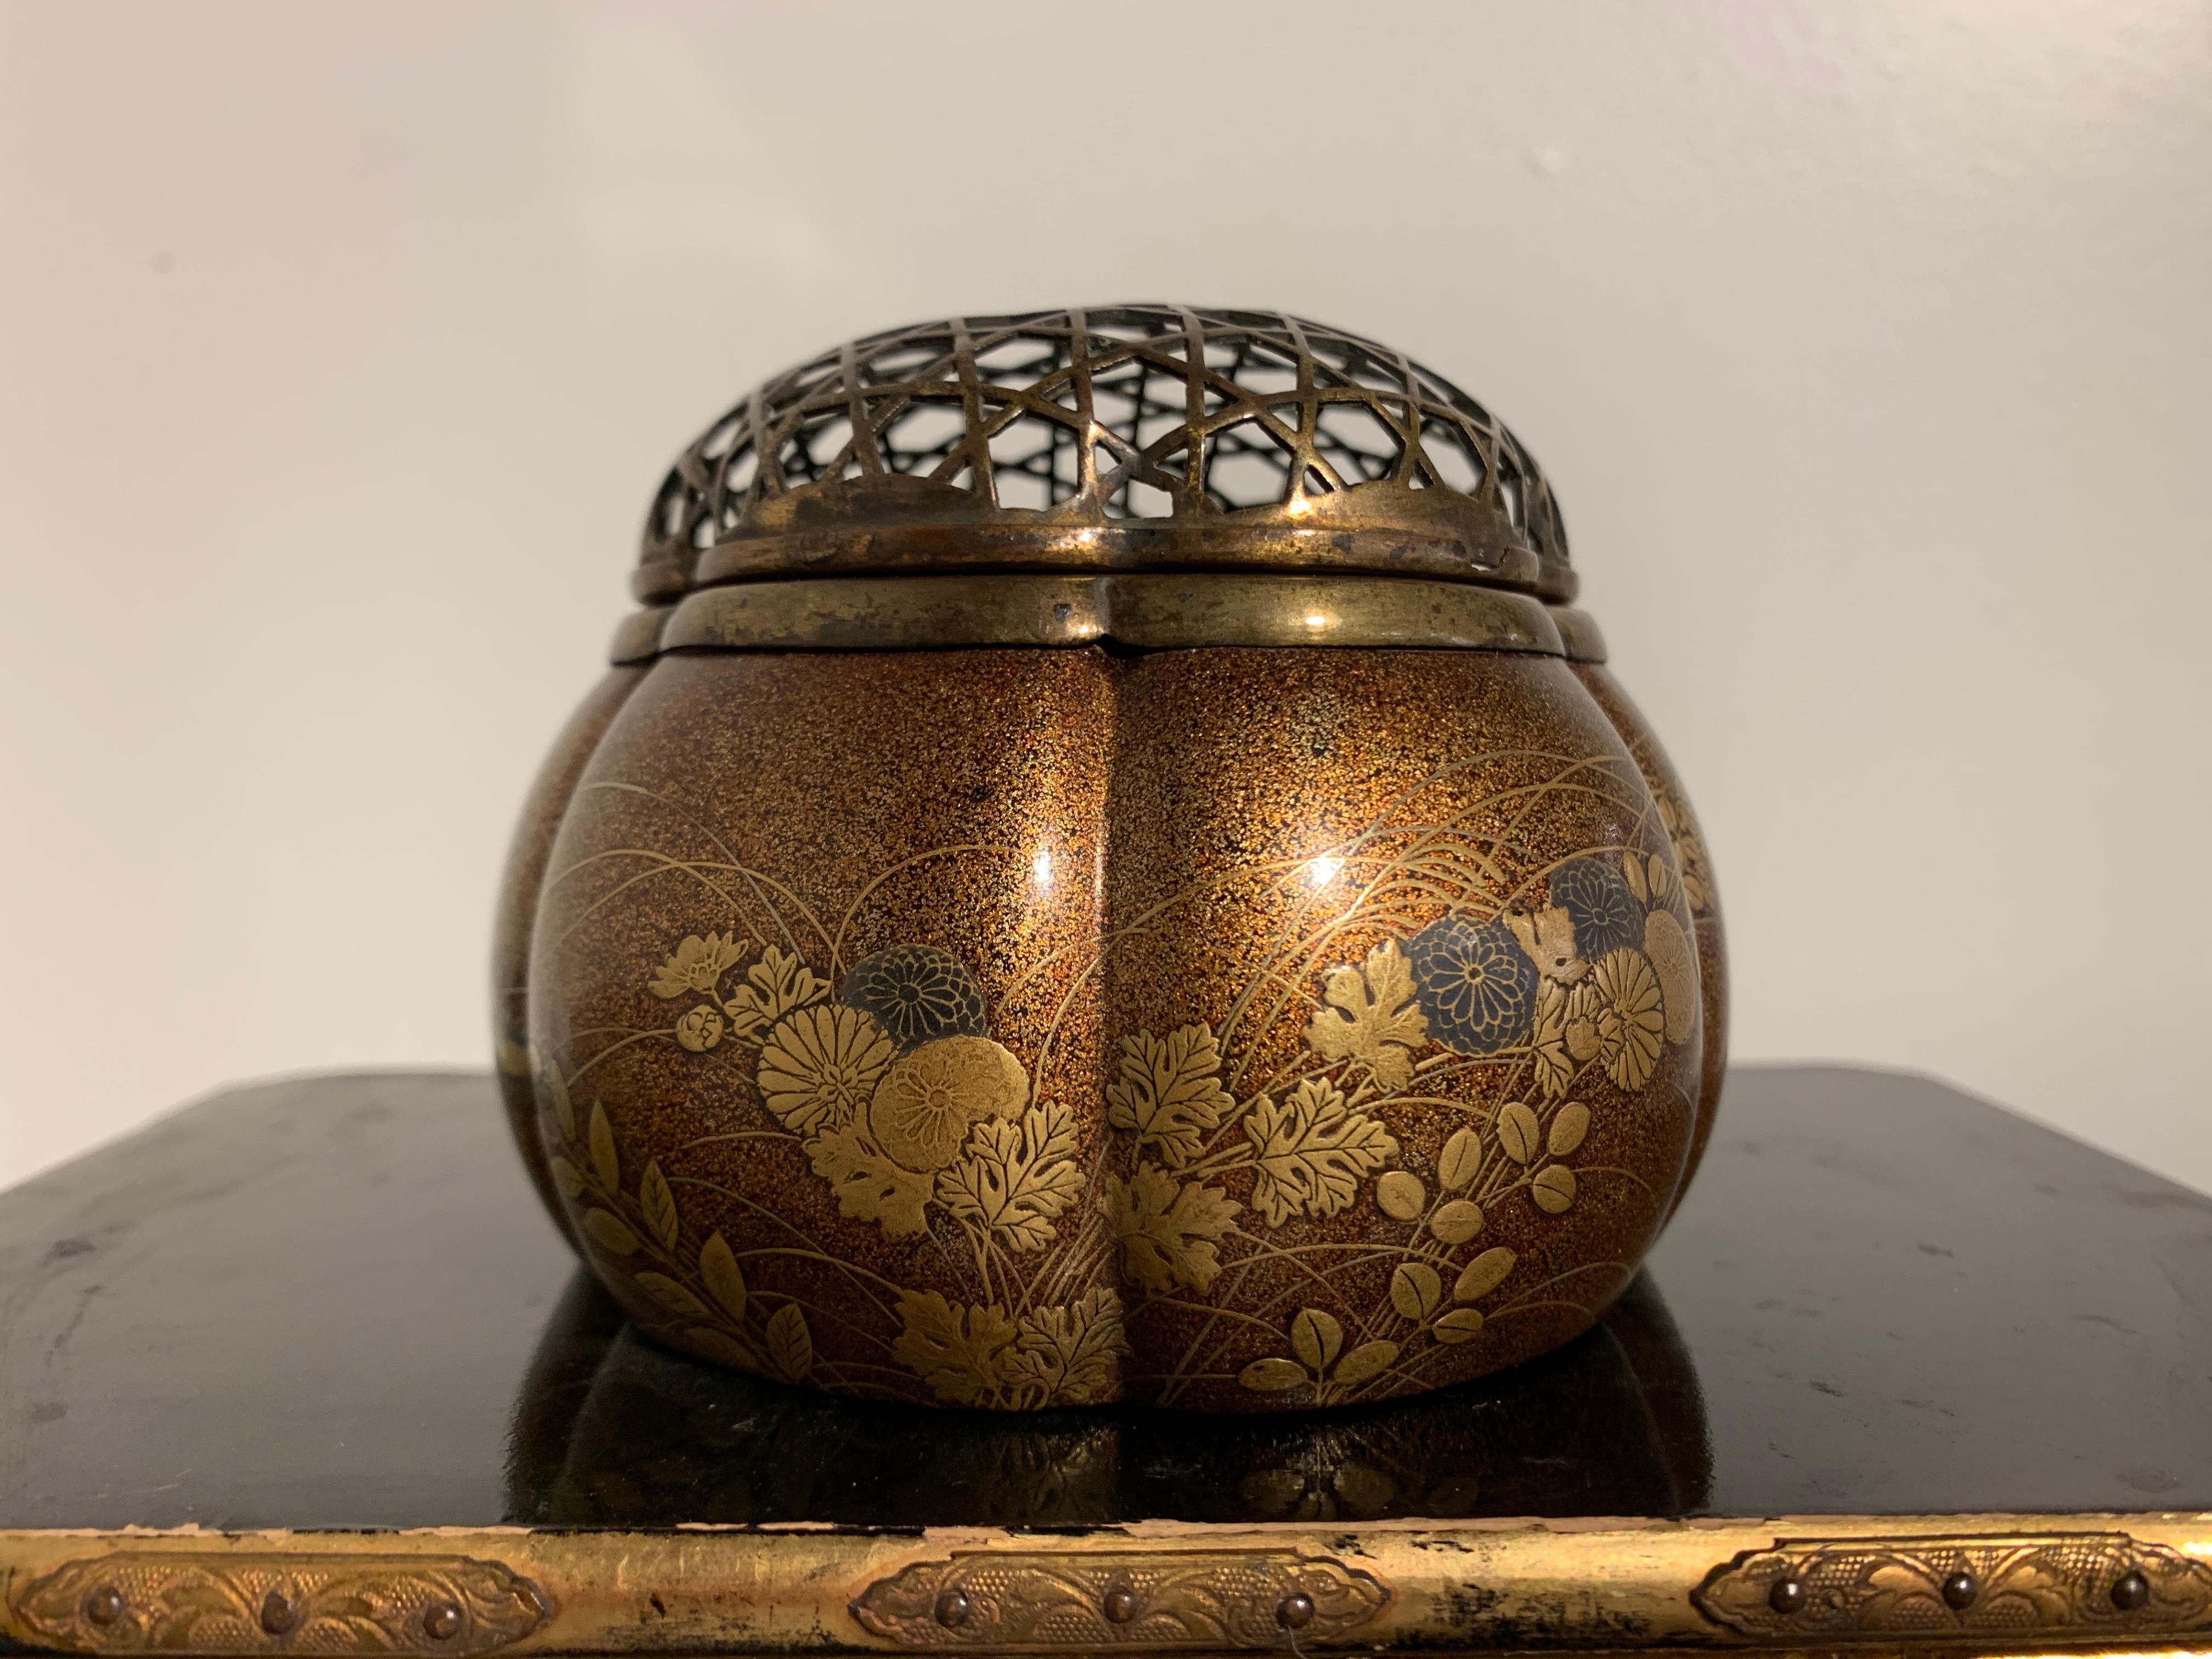 A very fine Japanese lacquer incense burner, akoda koro, of melon form with a design of autumnal grasses and chrysanthemum blossoms, with a gilt metal openwork cover, Edo Period, 17th-18th century, Japan.

The koro (censer) crafted of lacquer over